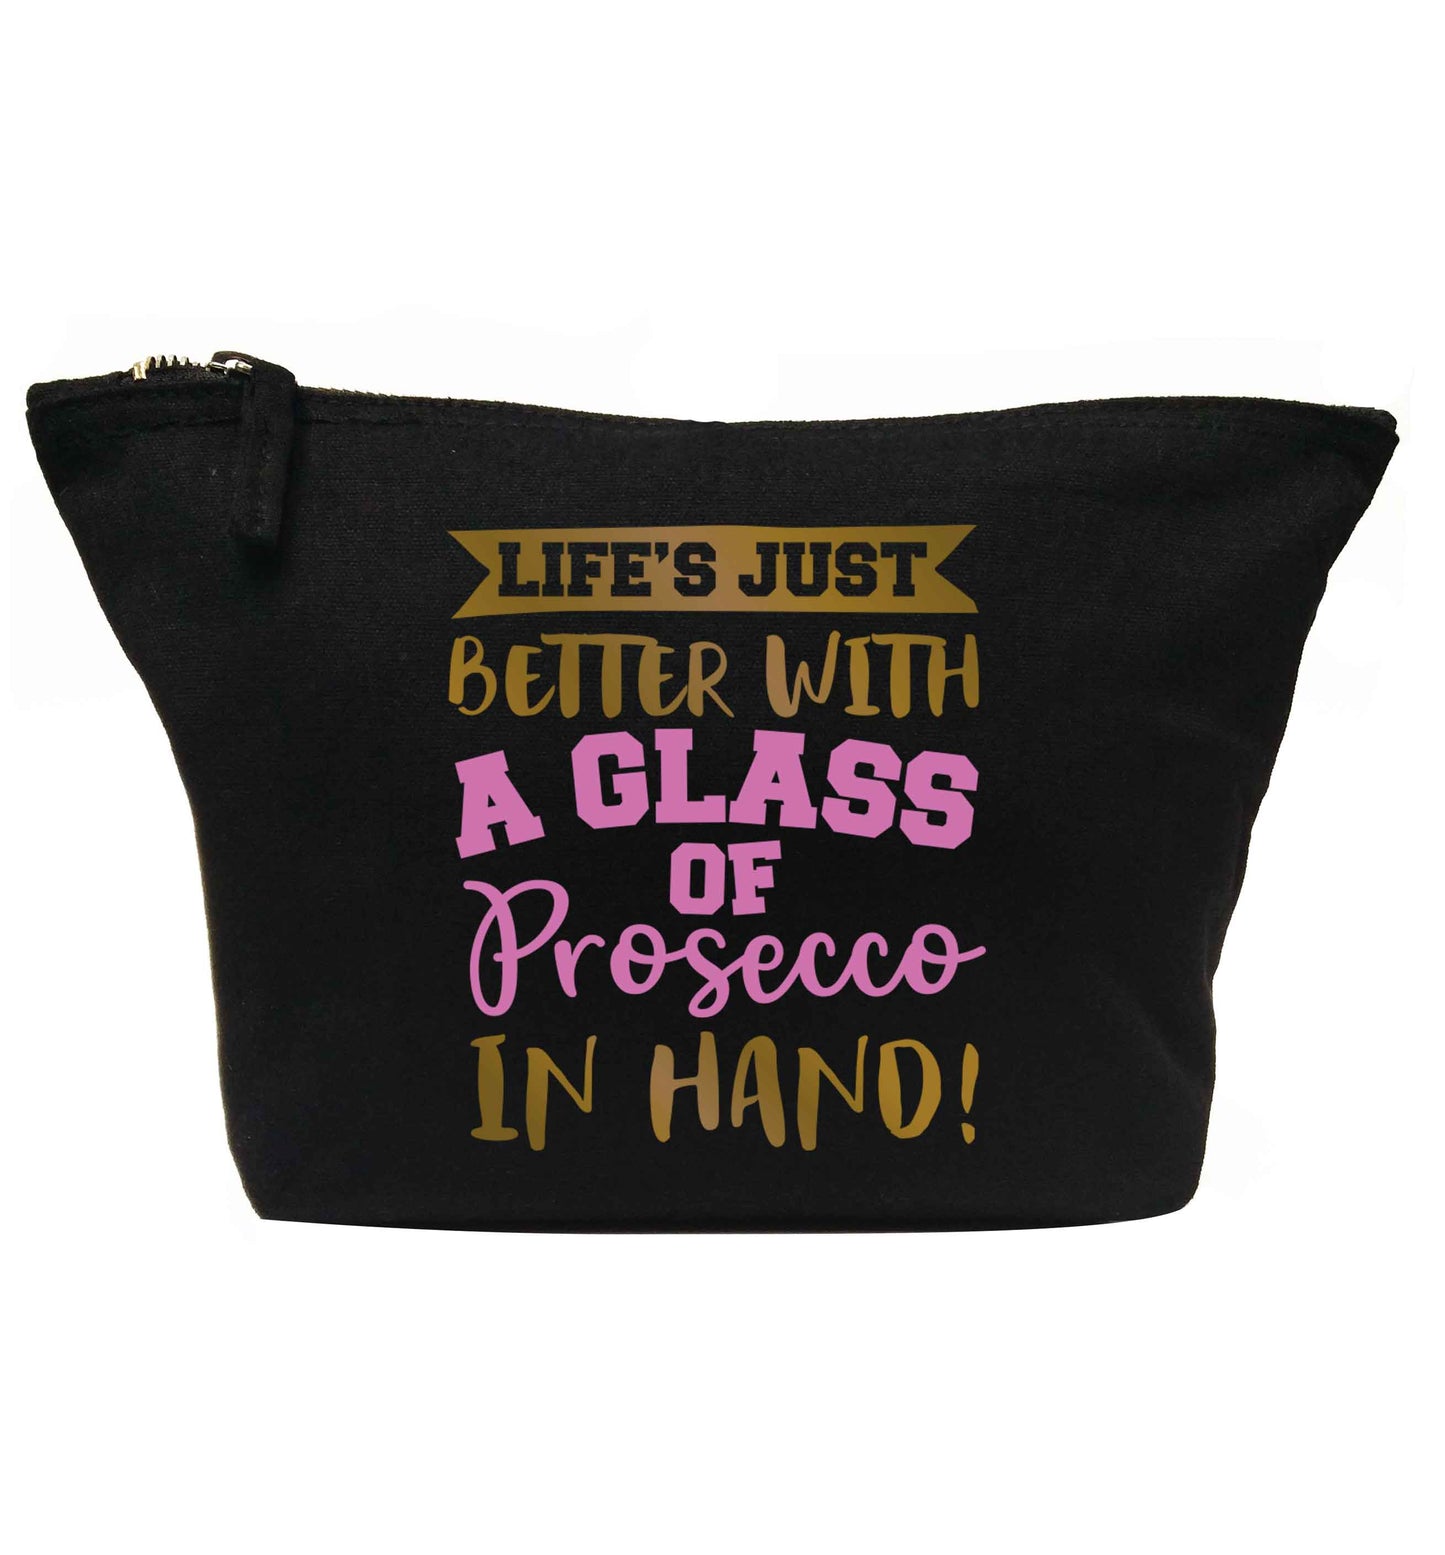 Life's just better with a glass of prosecco in hand | makeup / wash bag